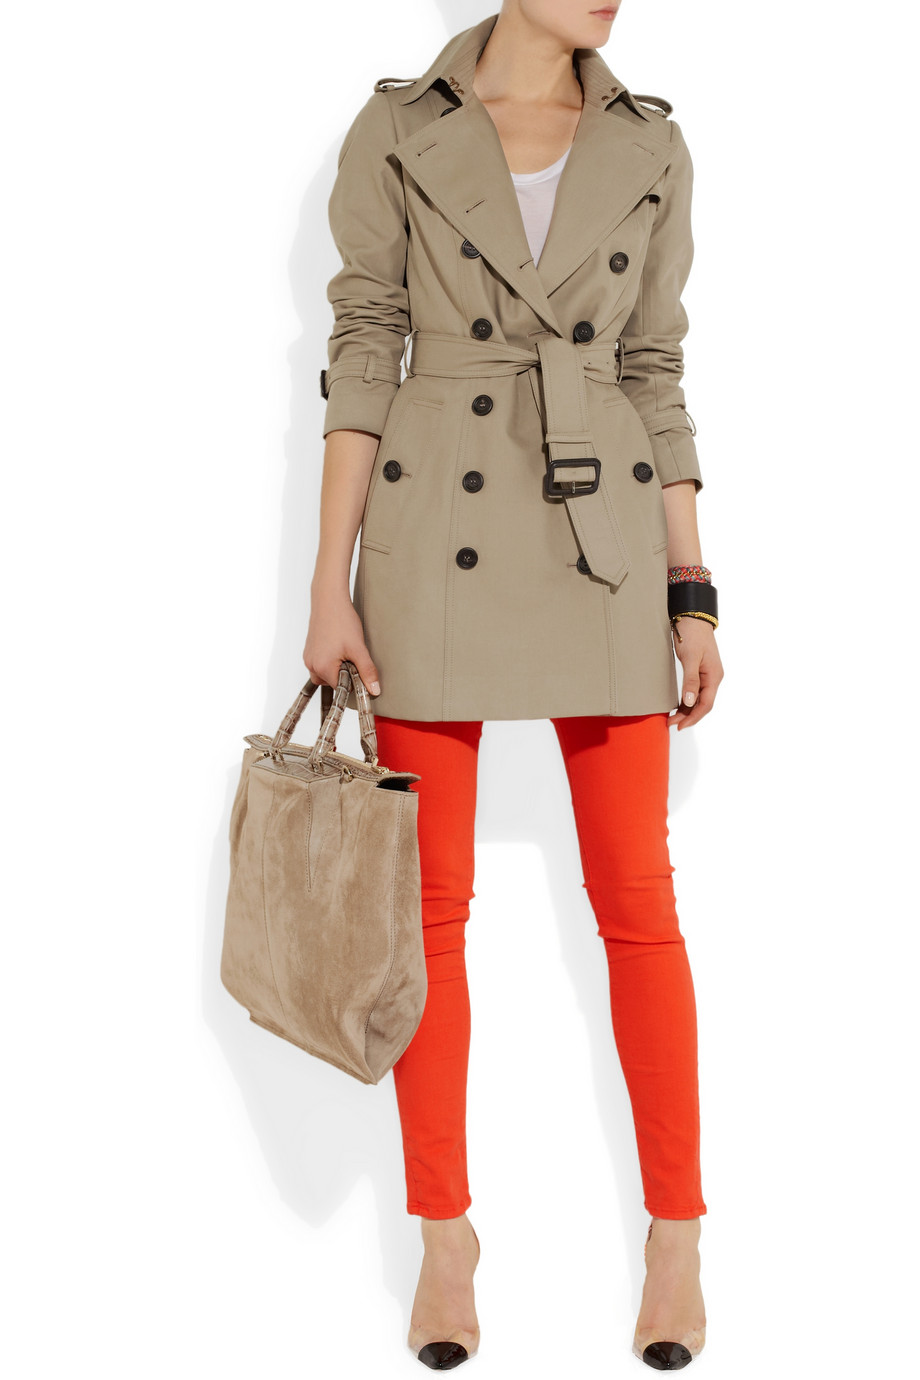 Burberry prorsum Cotton Sateen Trench Coat in Beige (trench) | Lyst